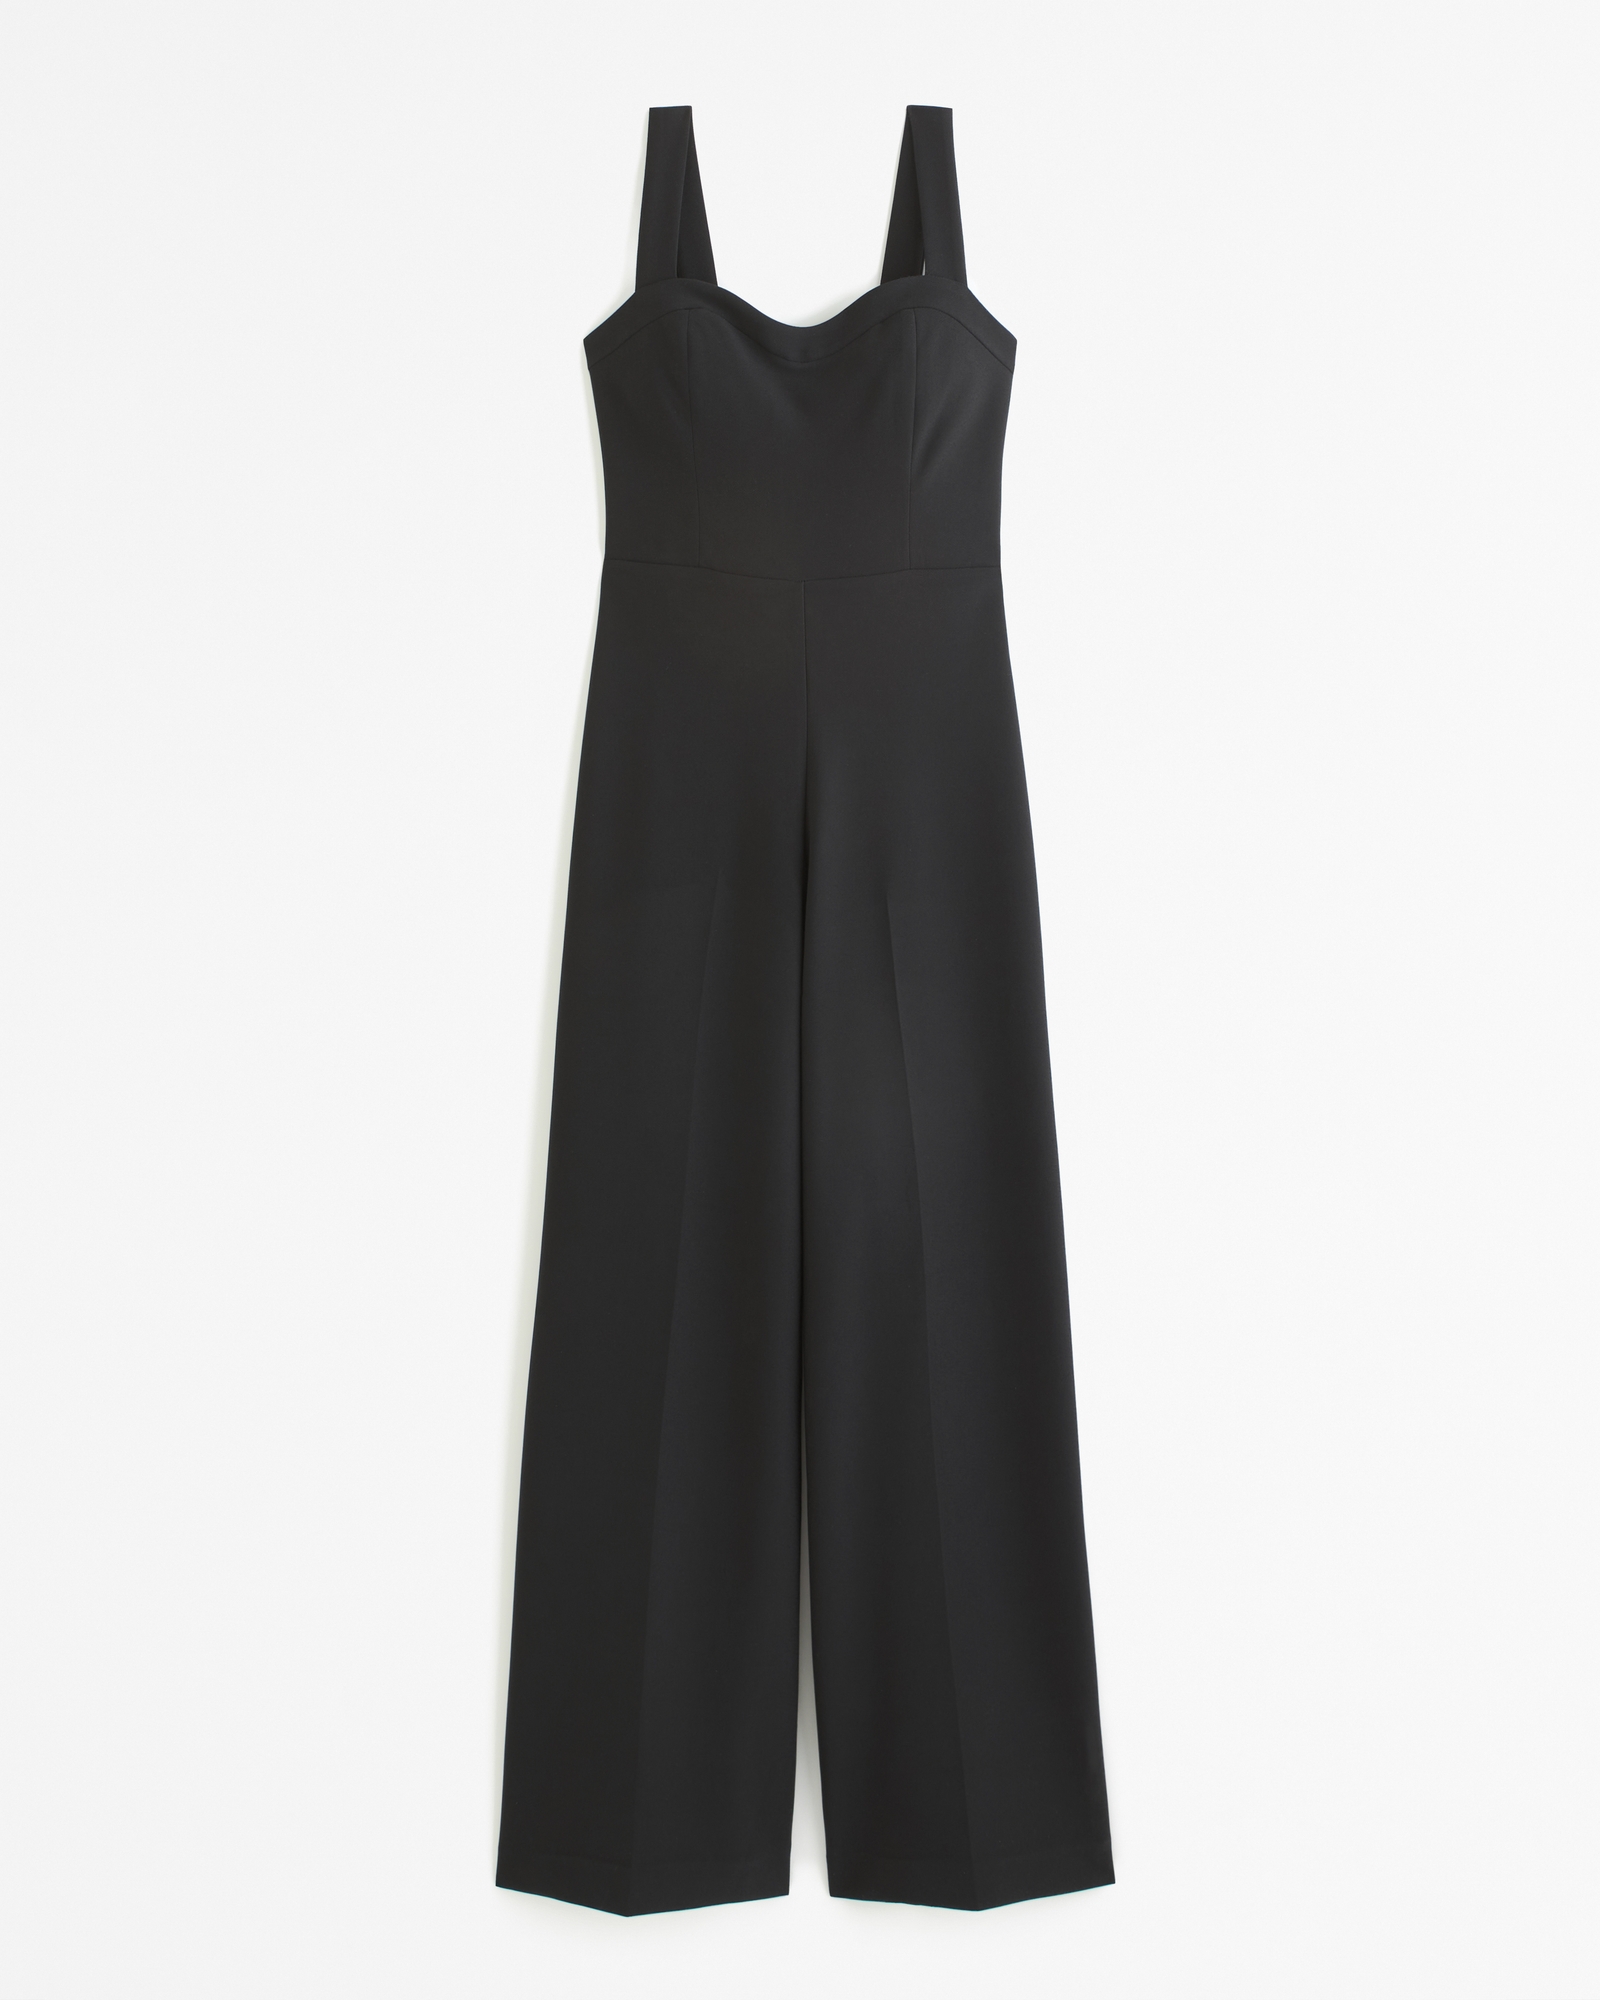 The A&F Camille Jumpsuit